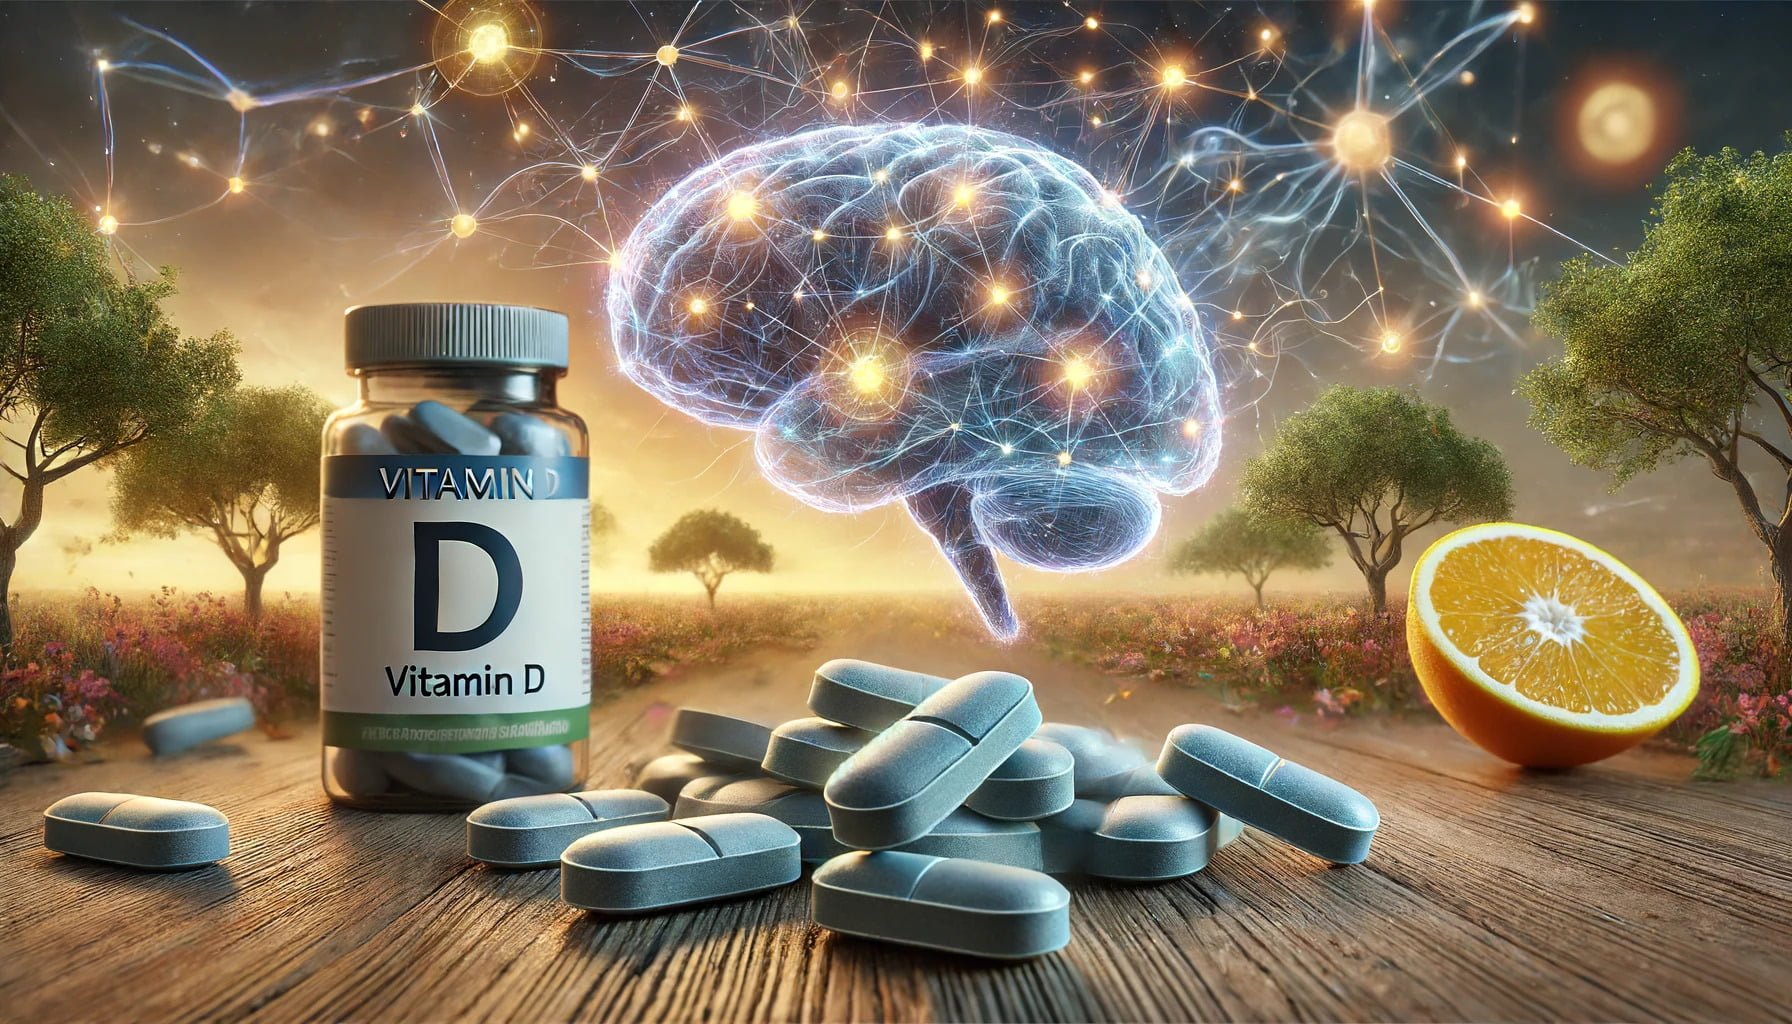 A photorealistic image of Vitamin D tablets, prominently displayed in a natural setting.